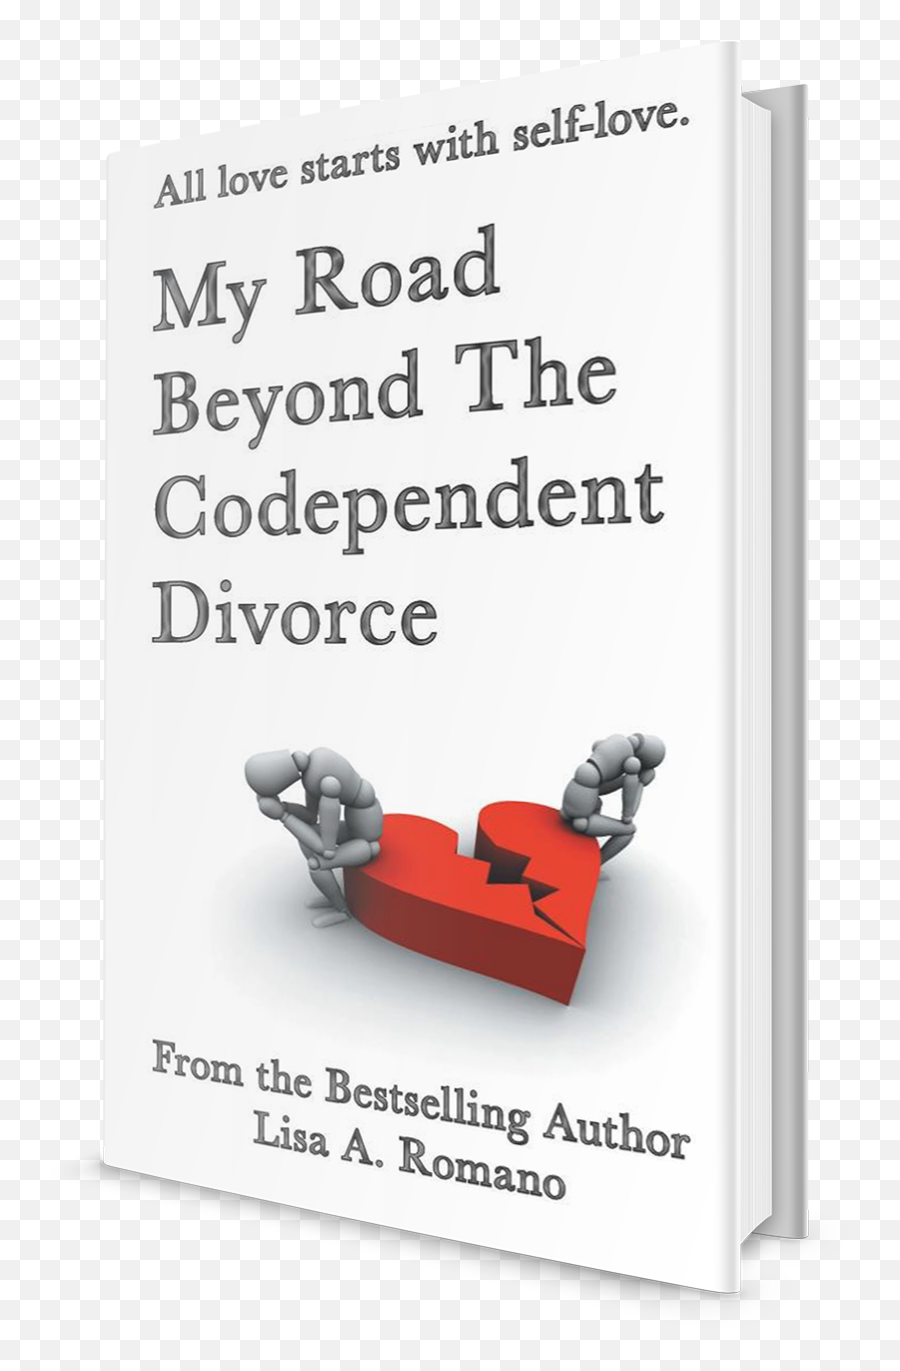 My Road Beyond The Codependent Divorce - Book Cover Emoji,Emotions Not What You Think Lisa